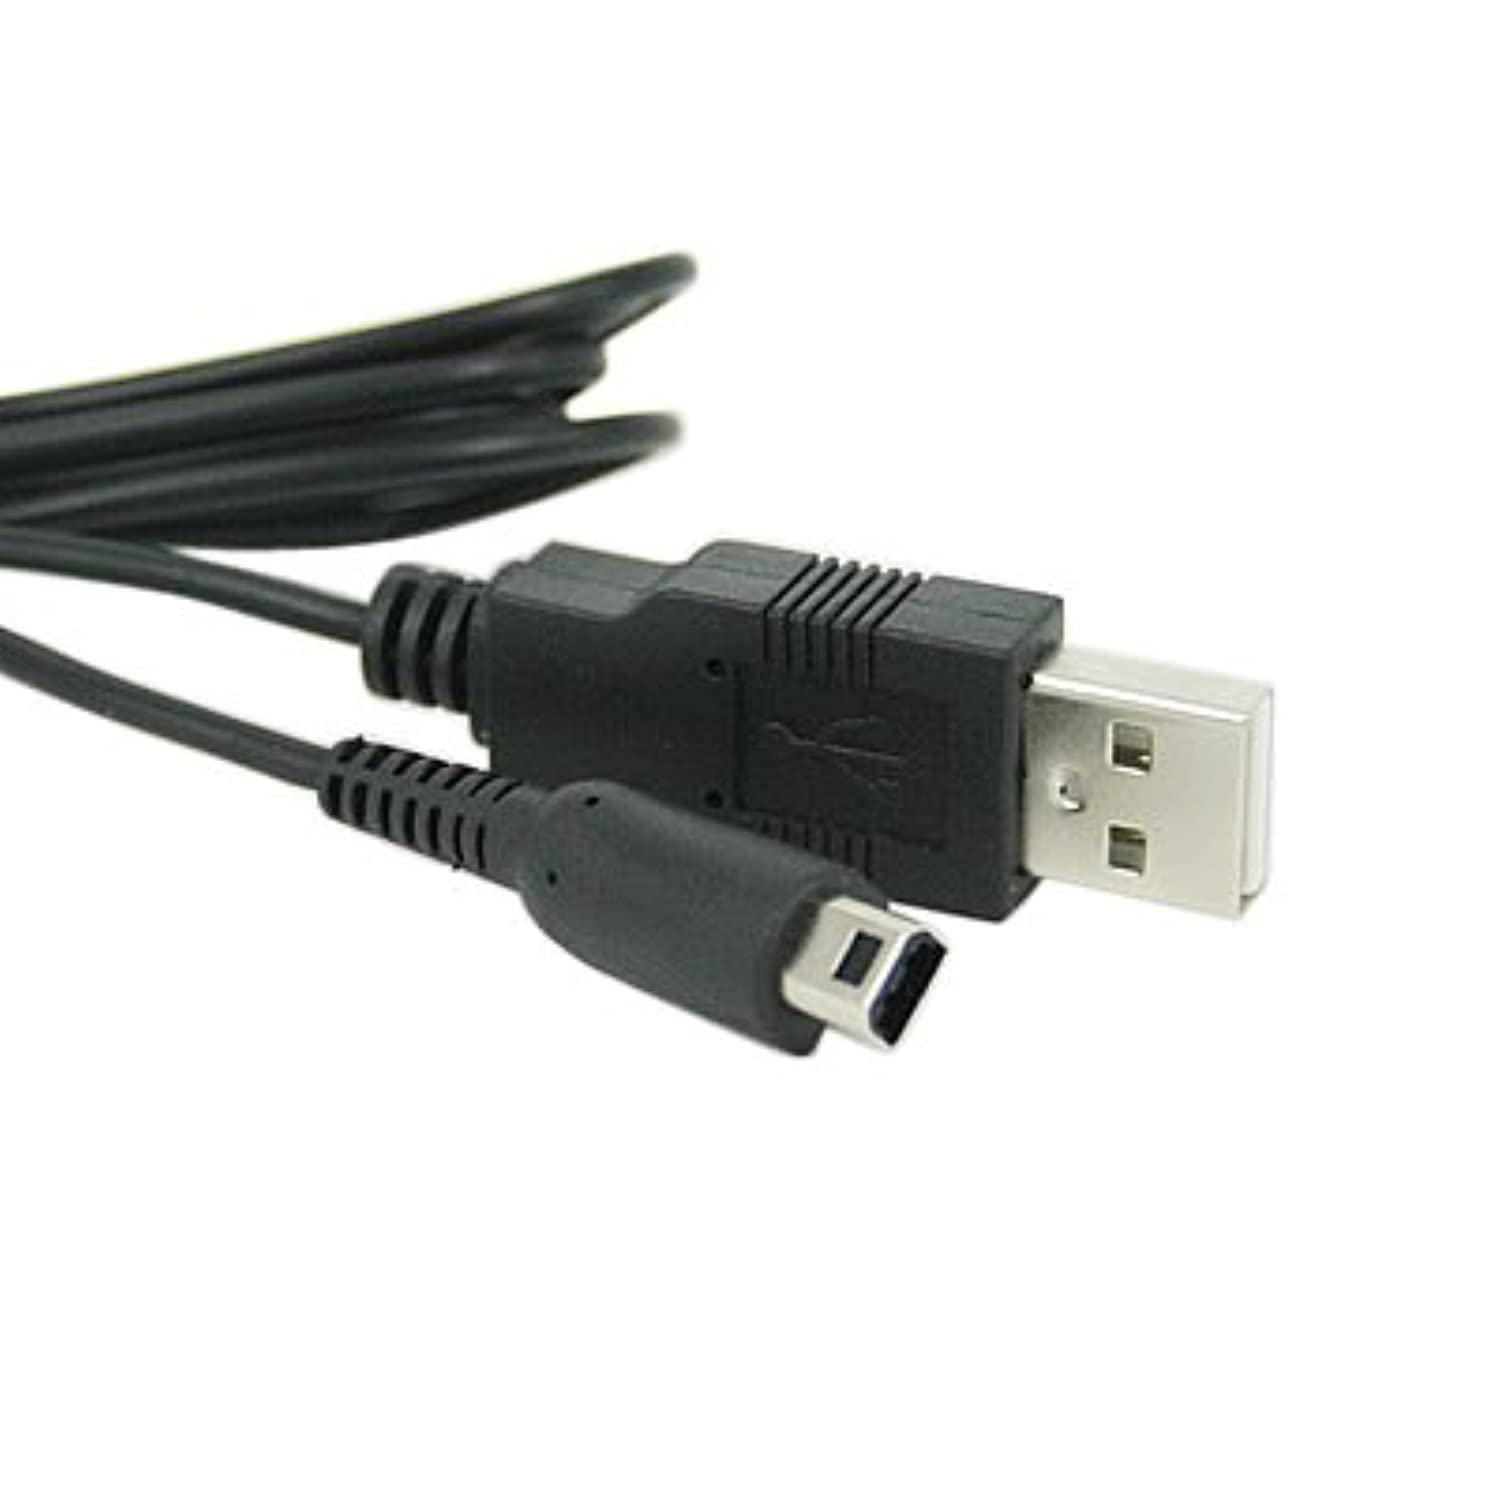 Gen USB Charge Cable for Nintendo 3DS/DSI/DSIXL